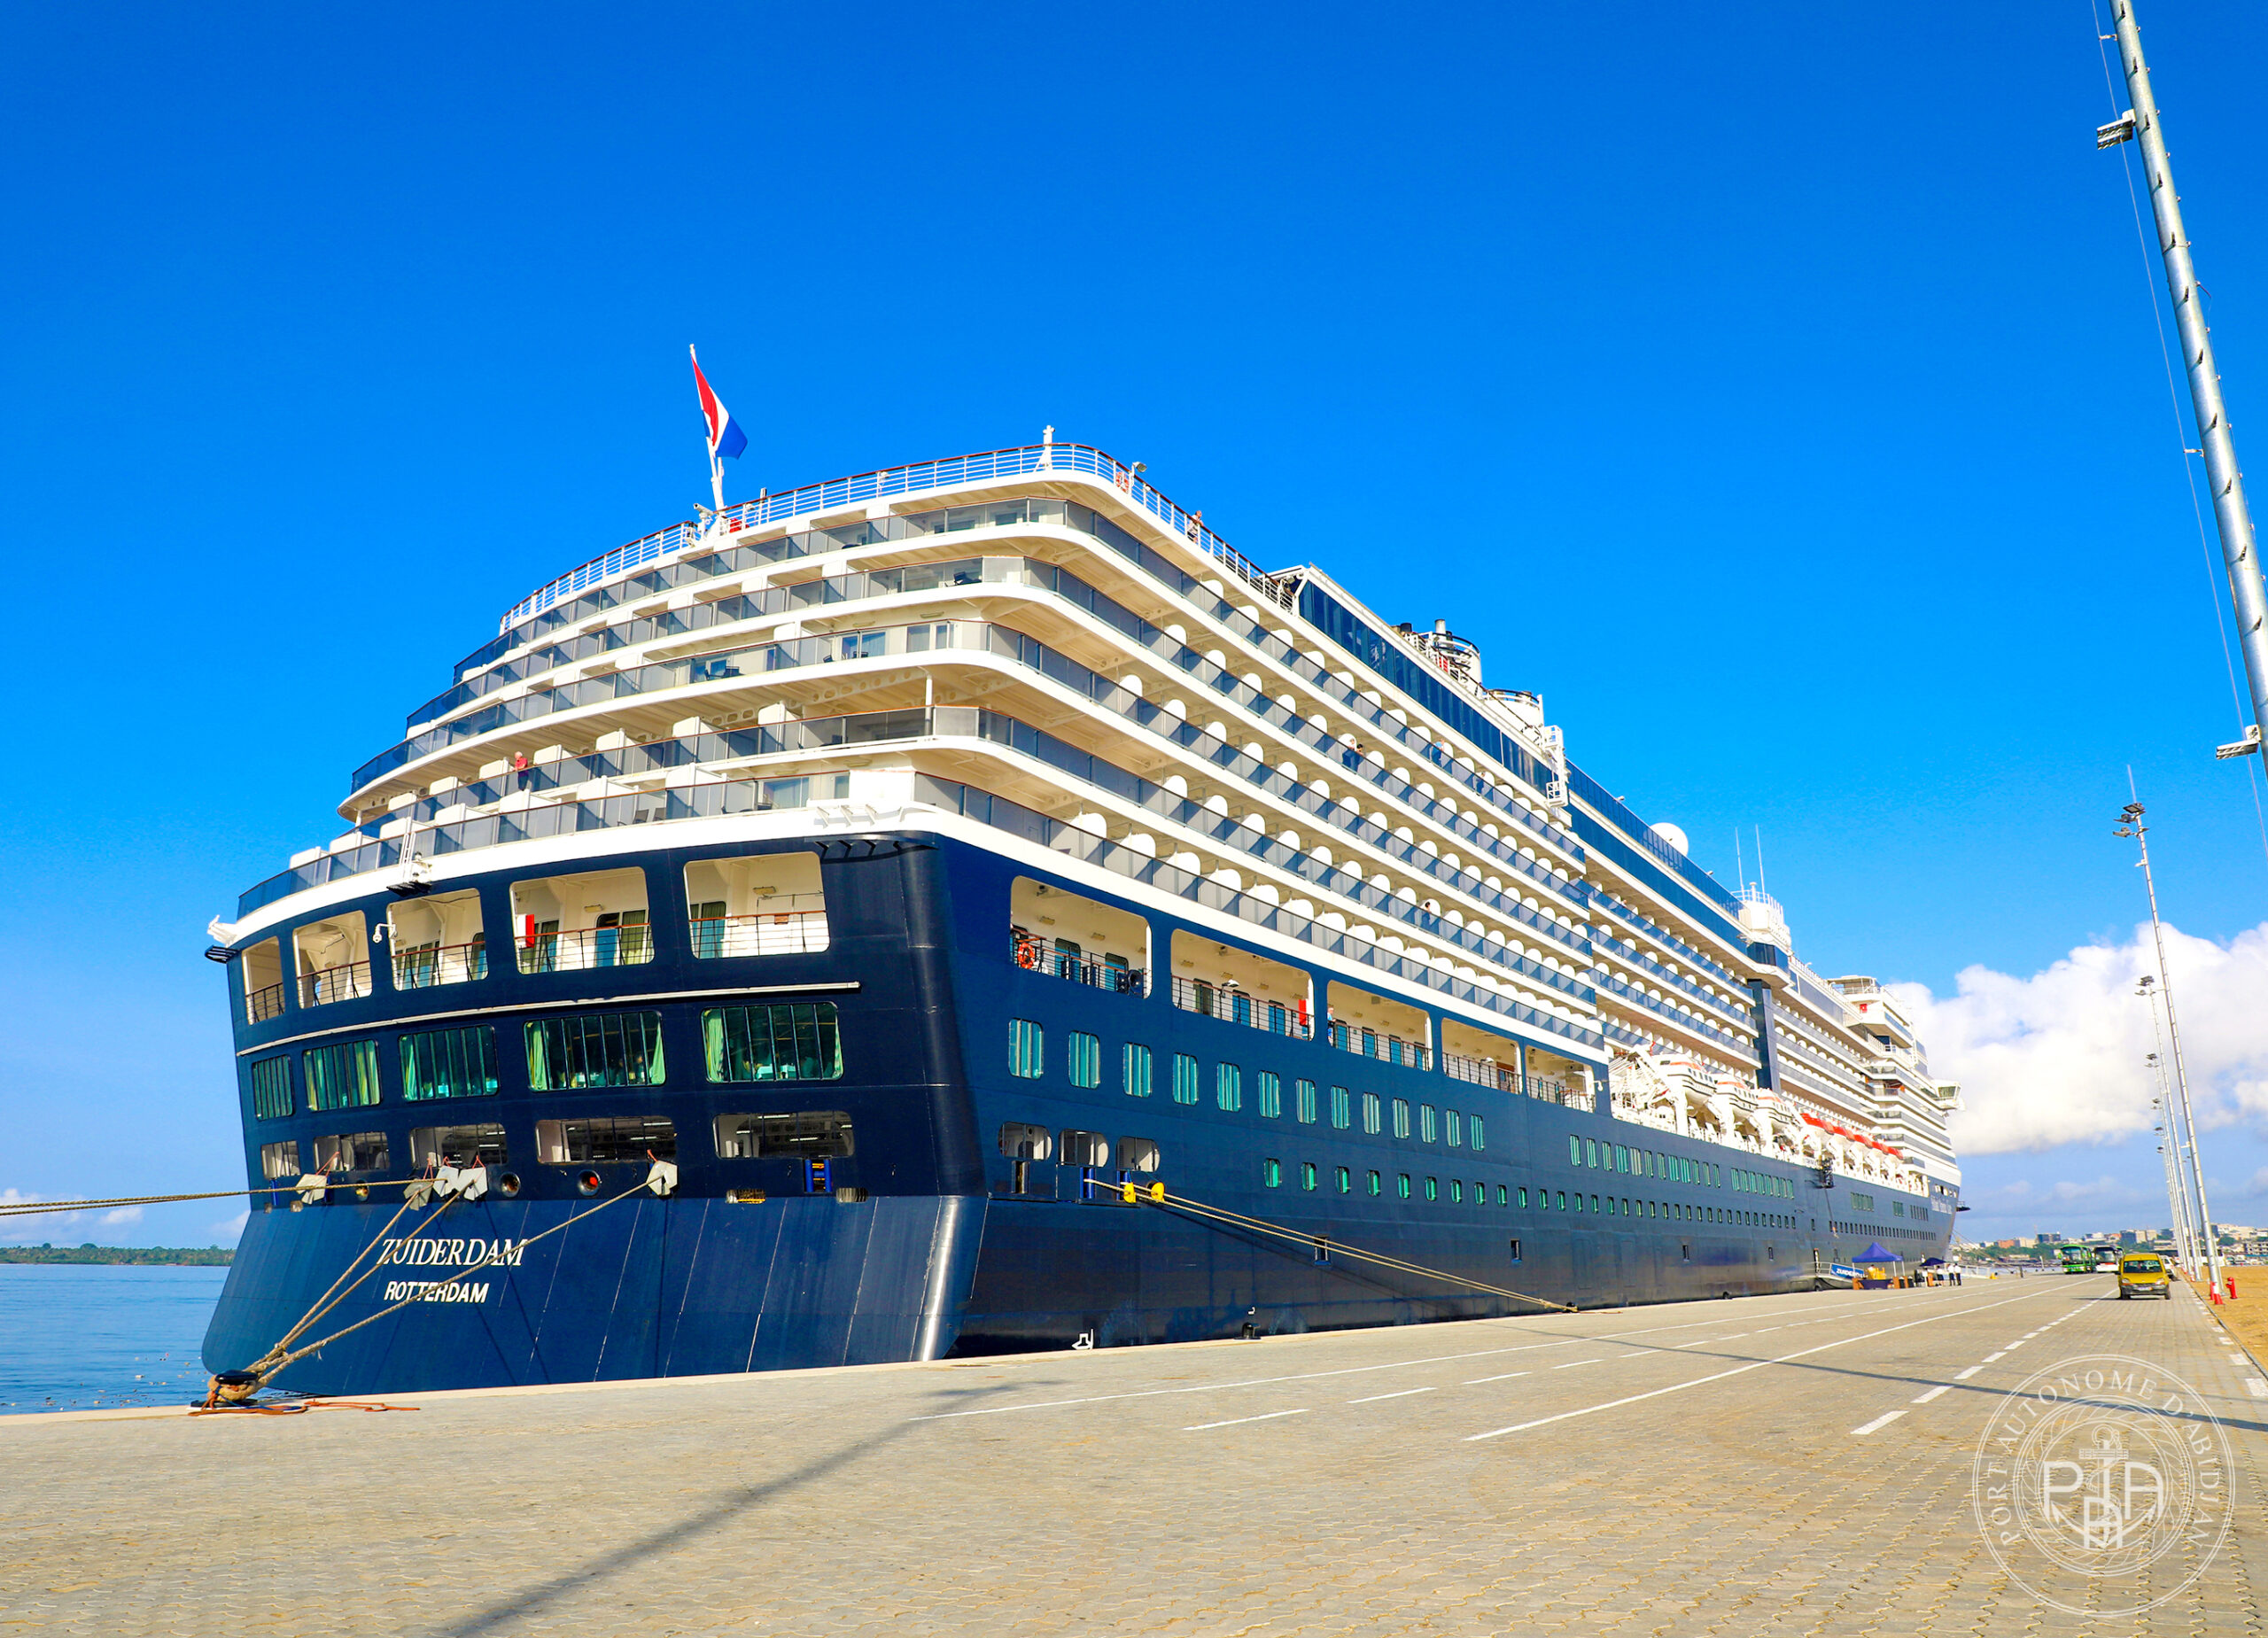 THE PORT OF ABIDJAN WELCOMES THE LARGEST CRUISE SHIP IN ITS HISTORY